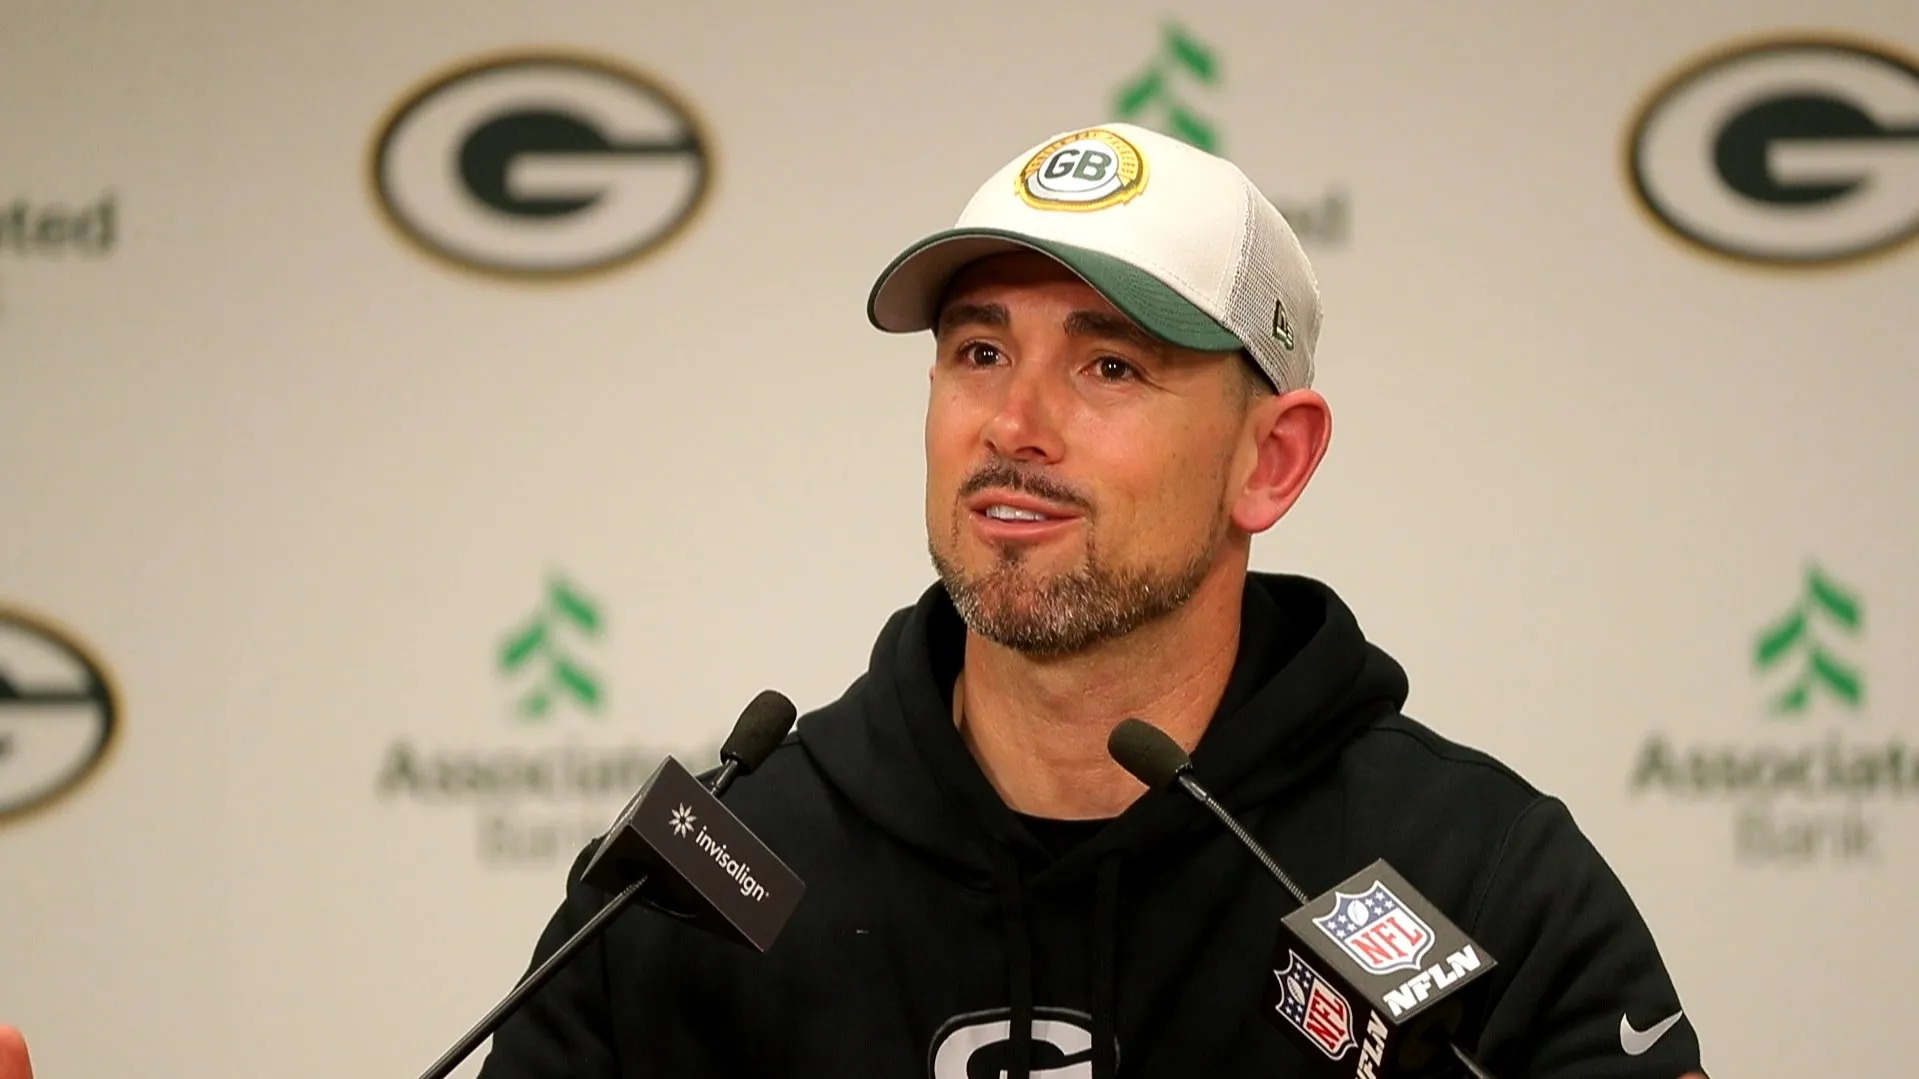 Green Bay Packers has agree to re-sign key man who left for rivals last year due to…